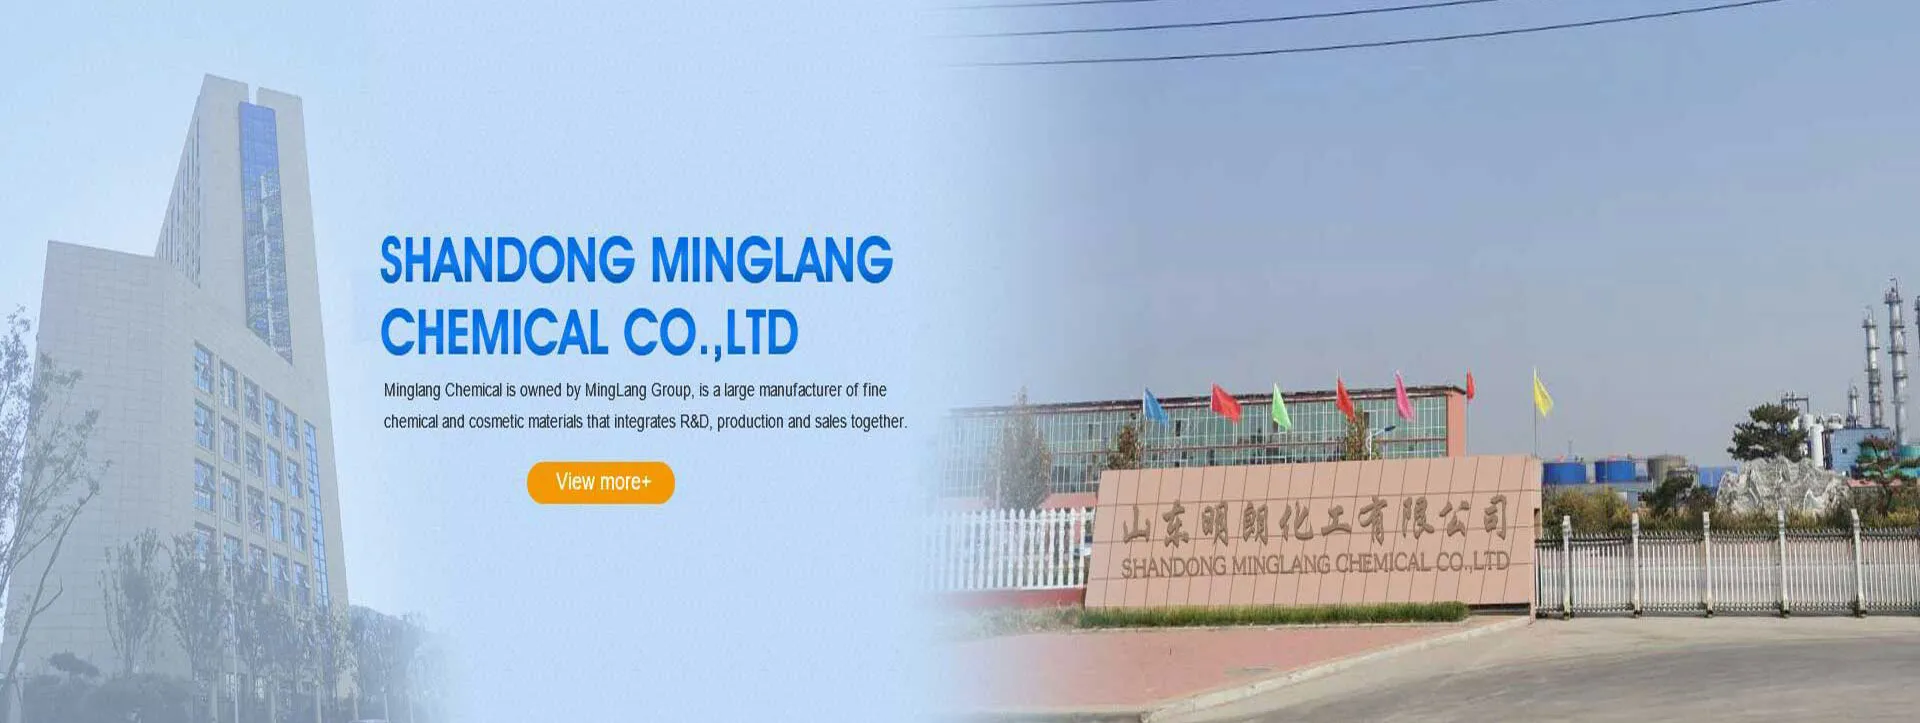 Minglang chemical is owned by Minglang Grop